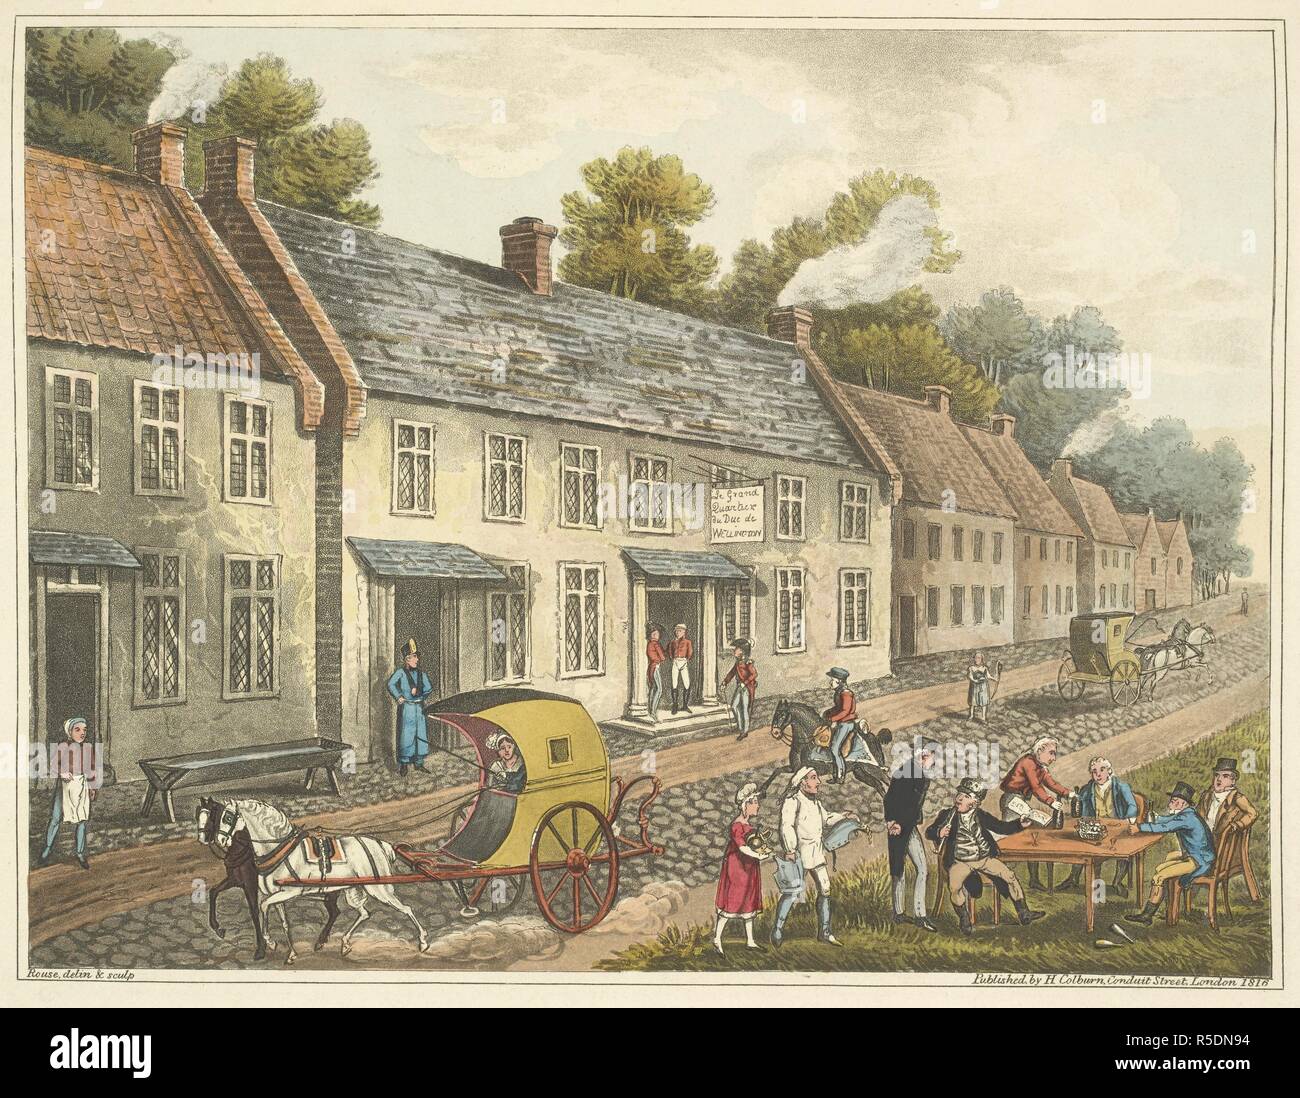 Head-quarters of the Duke of Wellington, in the village of Waterloo. Here his grace slept on the 17th, and the house is still called Wellington Hotel'. An Historical Account of the Campaign in the Netherlands, in 1815, under His Grace the Duke of Wellington, and Marshal Prince Blucher, comprising the battles of Ligny, Quatrebras, and Waterloo; with a detailed narrative of the political events connected with those memorable conflicts down to the surrender of Paris, and the departure of Bonaparte for St. Helena ... Embellished with ... plates ... from drawings ... by James Rouse. London : Henry  Stock Photo